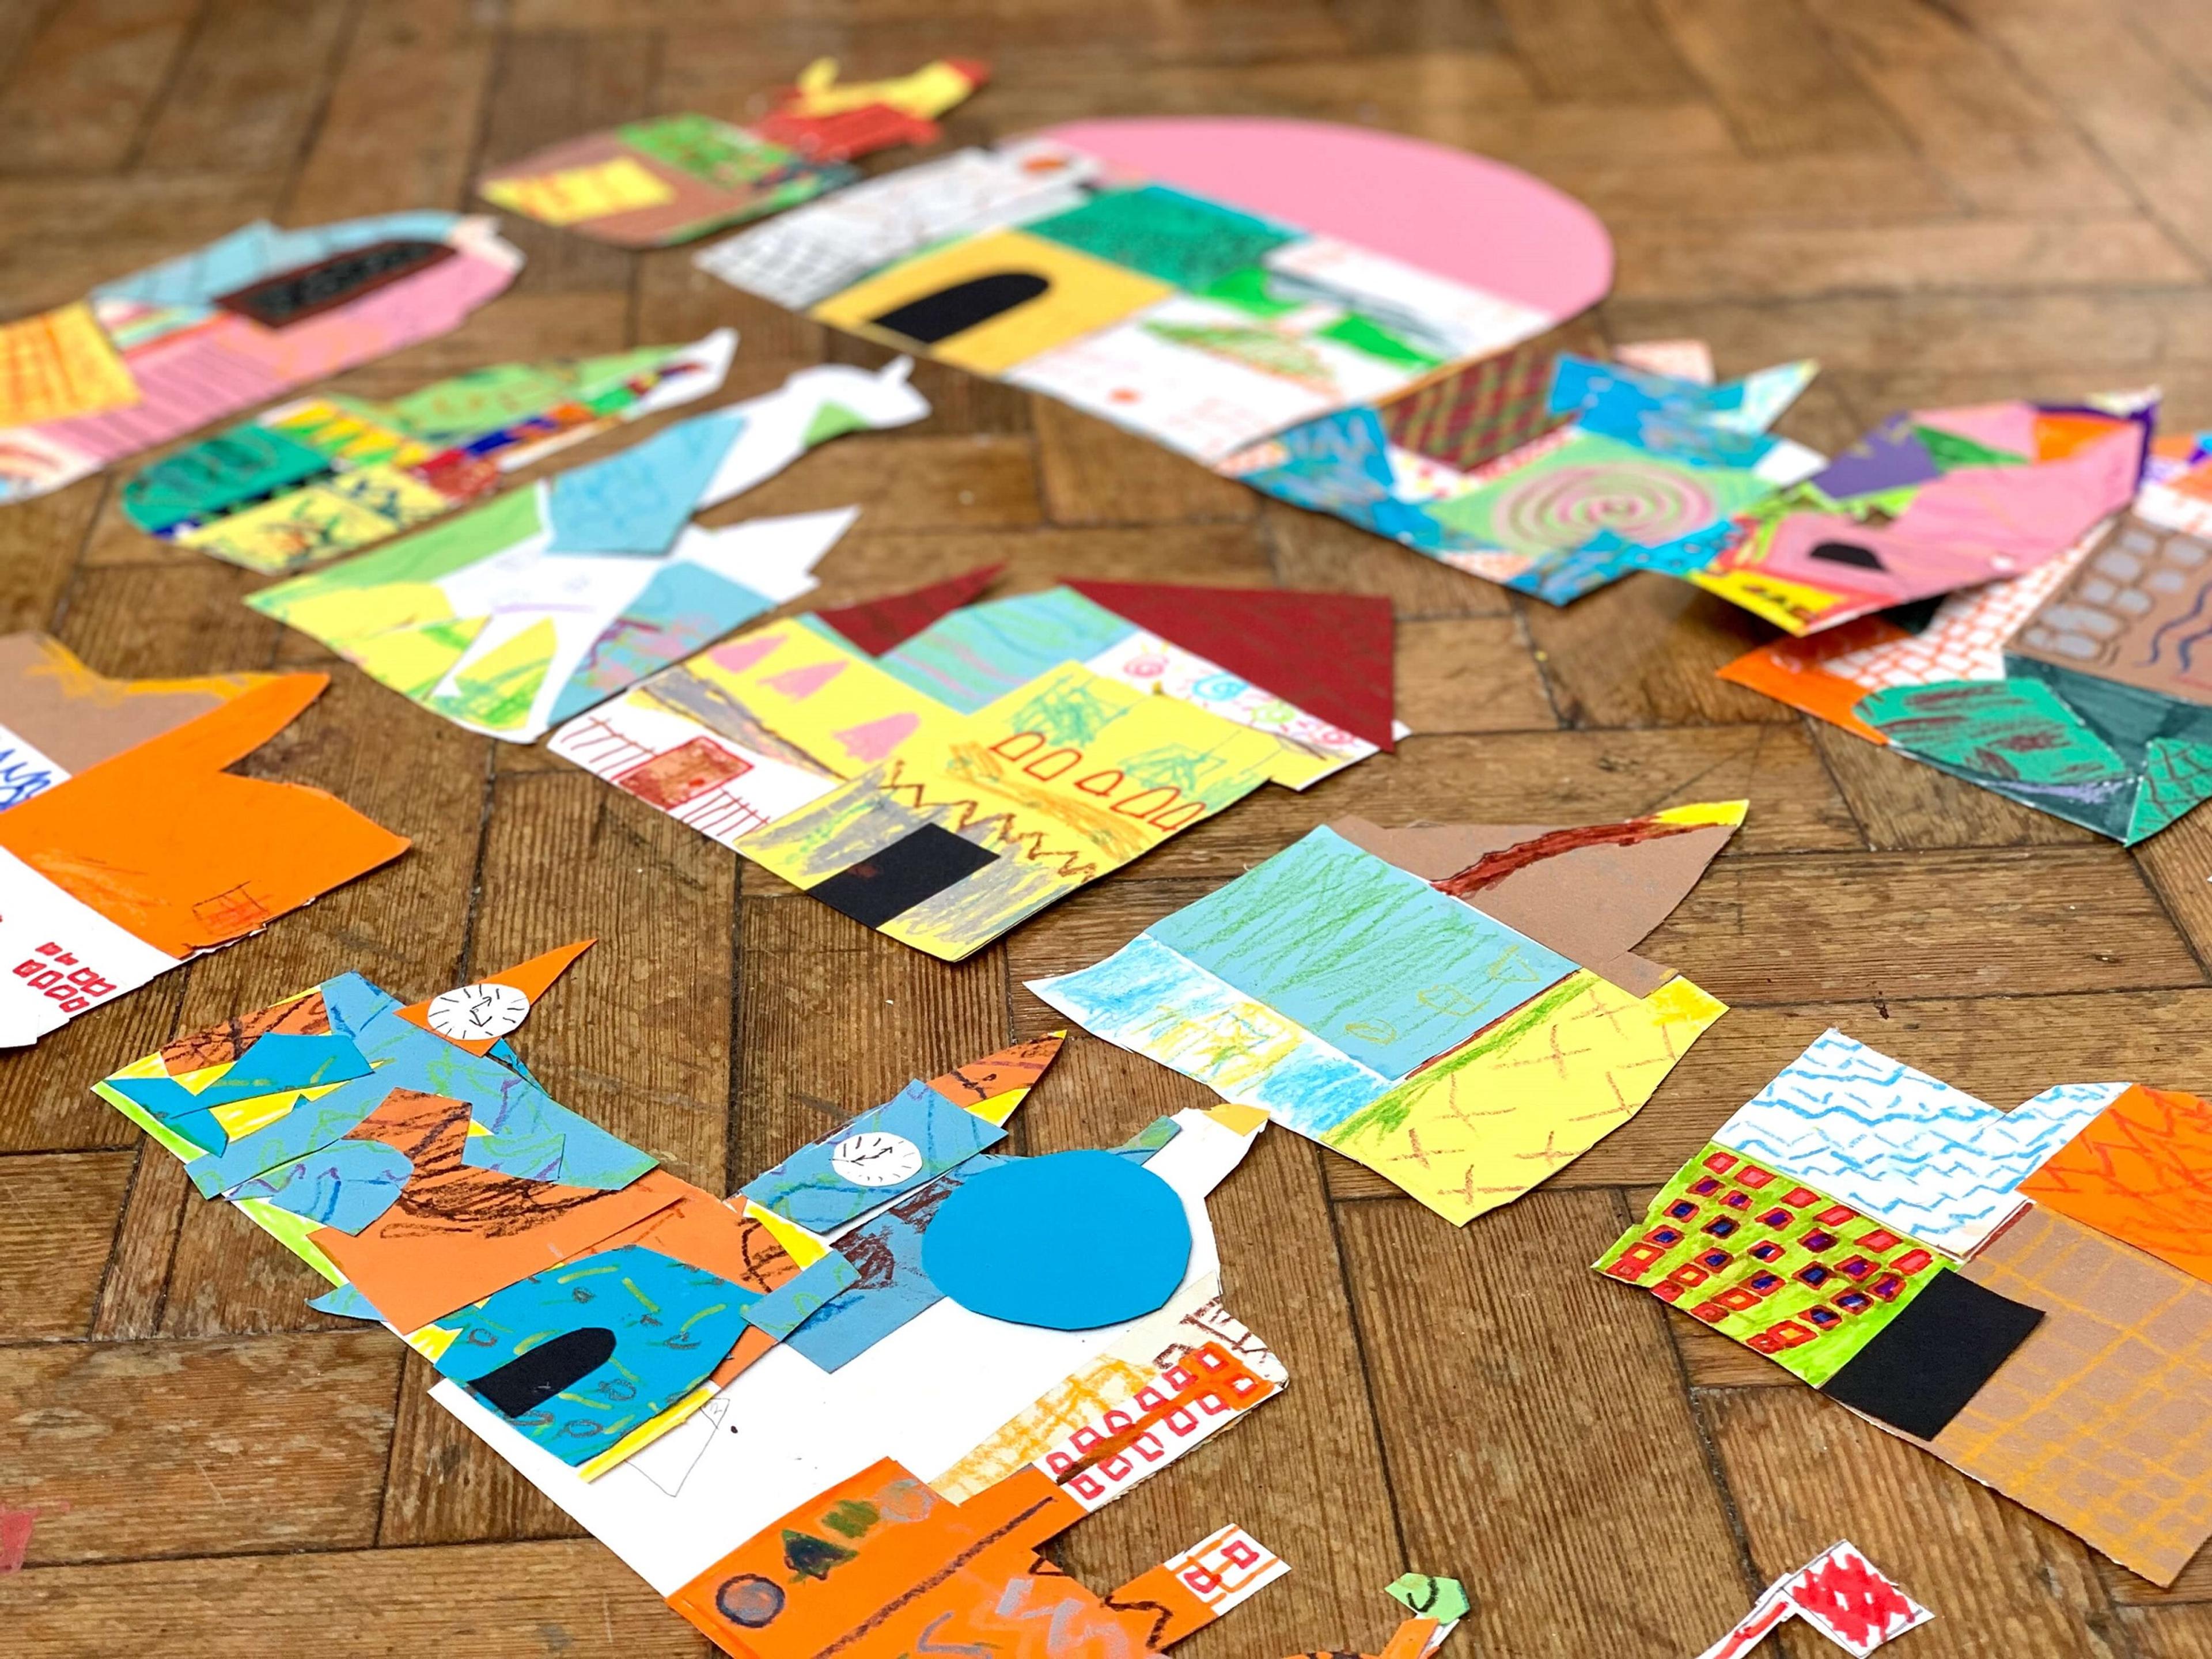 Brightly coloured collages of buildings laid out on a wooden floor